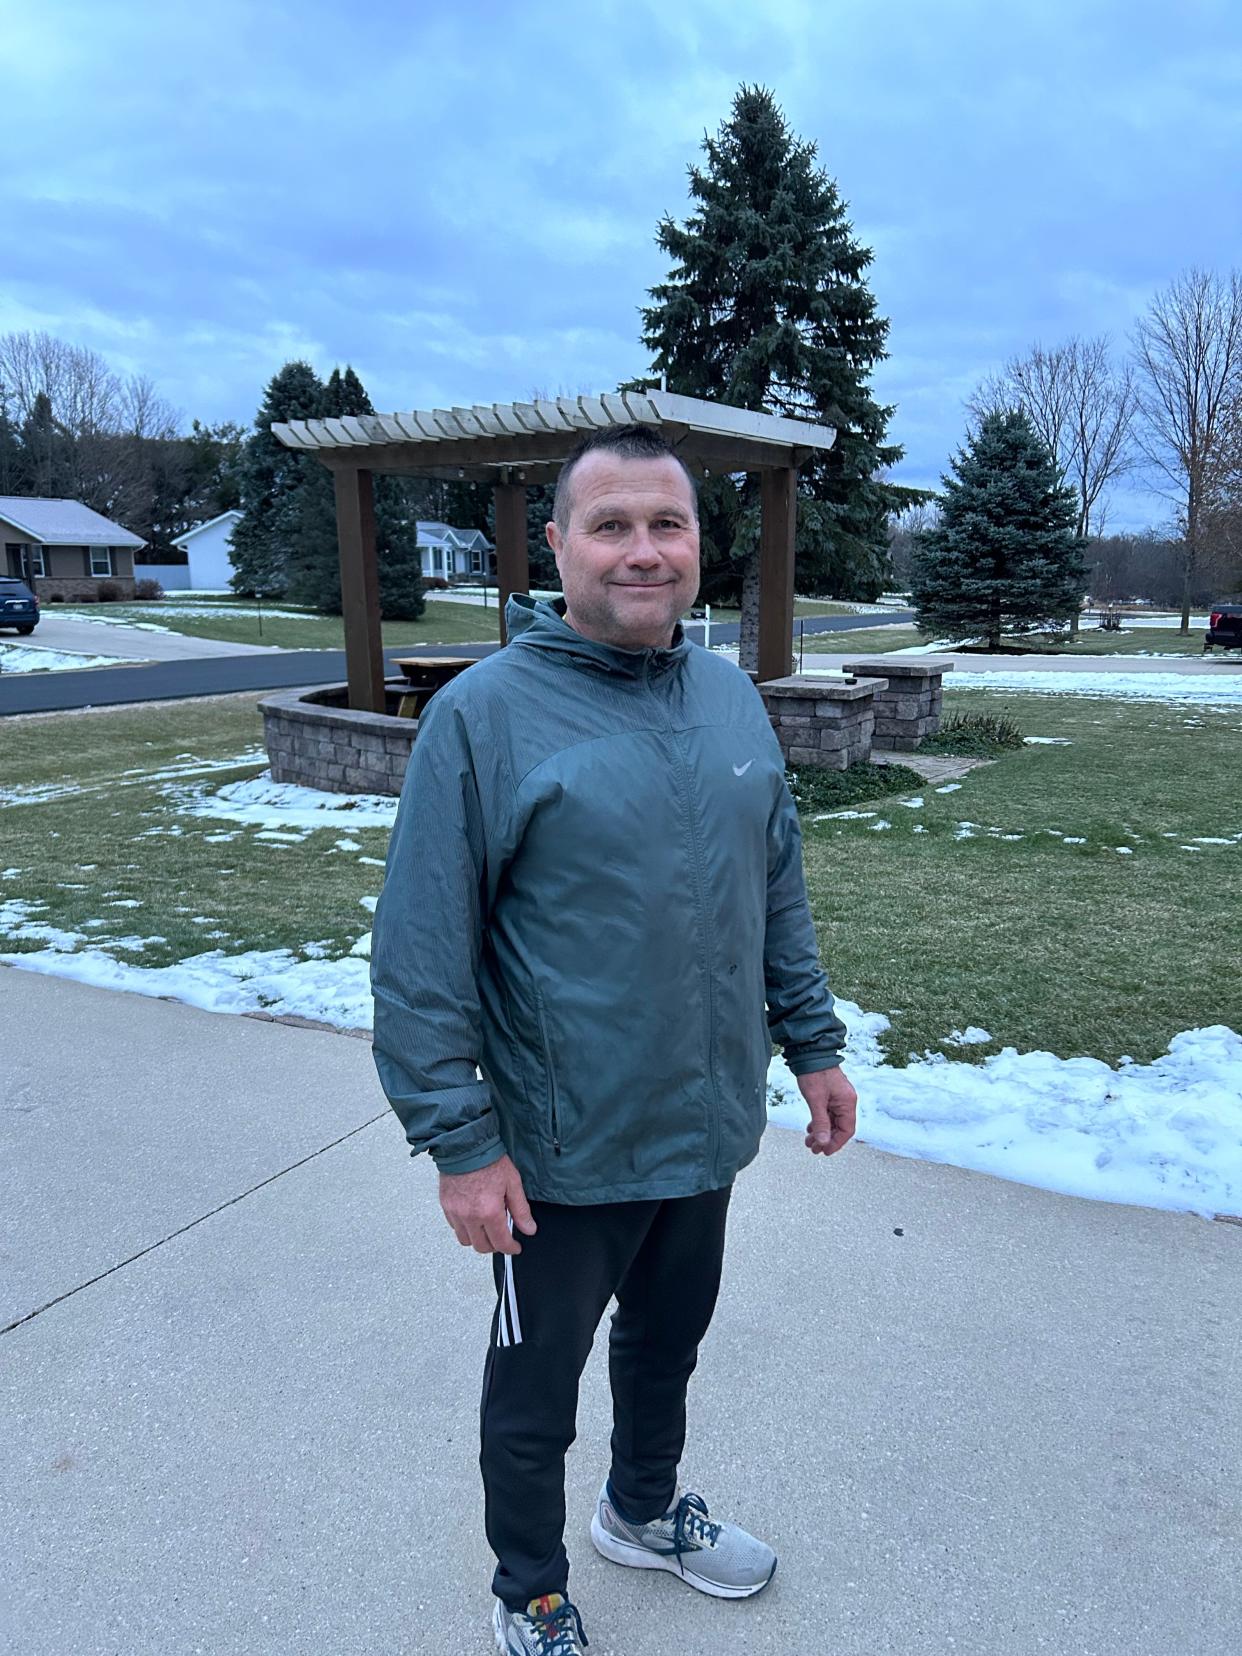 Peter Rettler has been on a running streak since Jan. 1, 1994. He is hoping to make it 30 years by the end of this month.